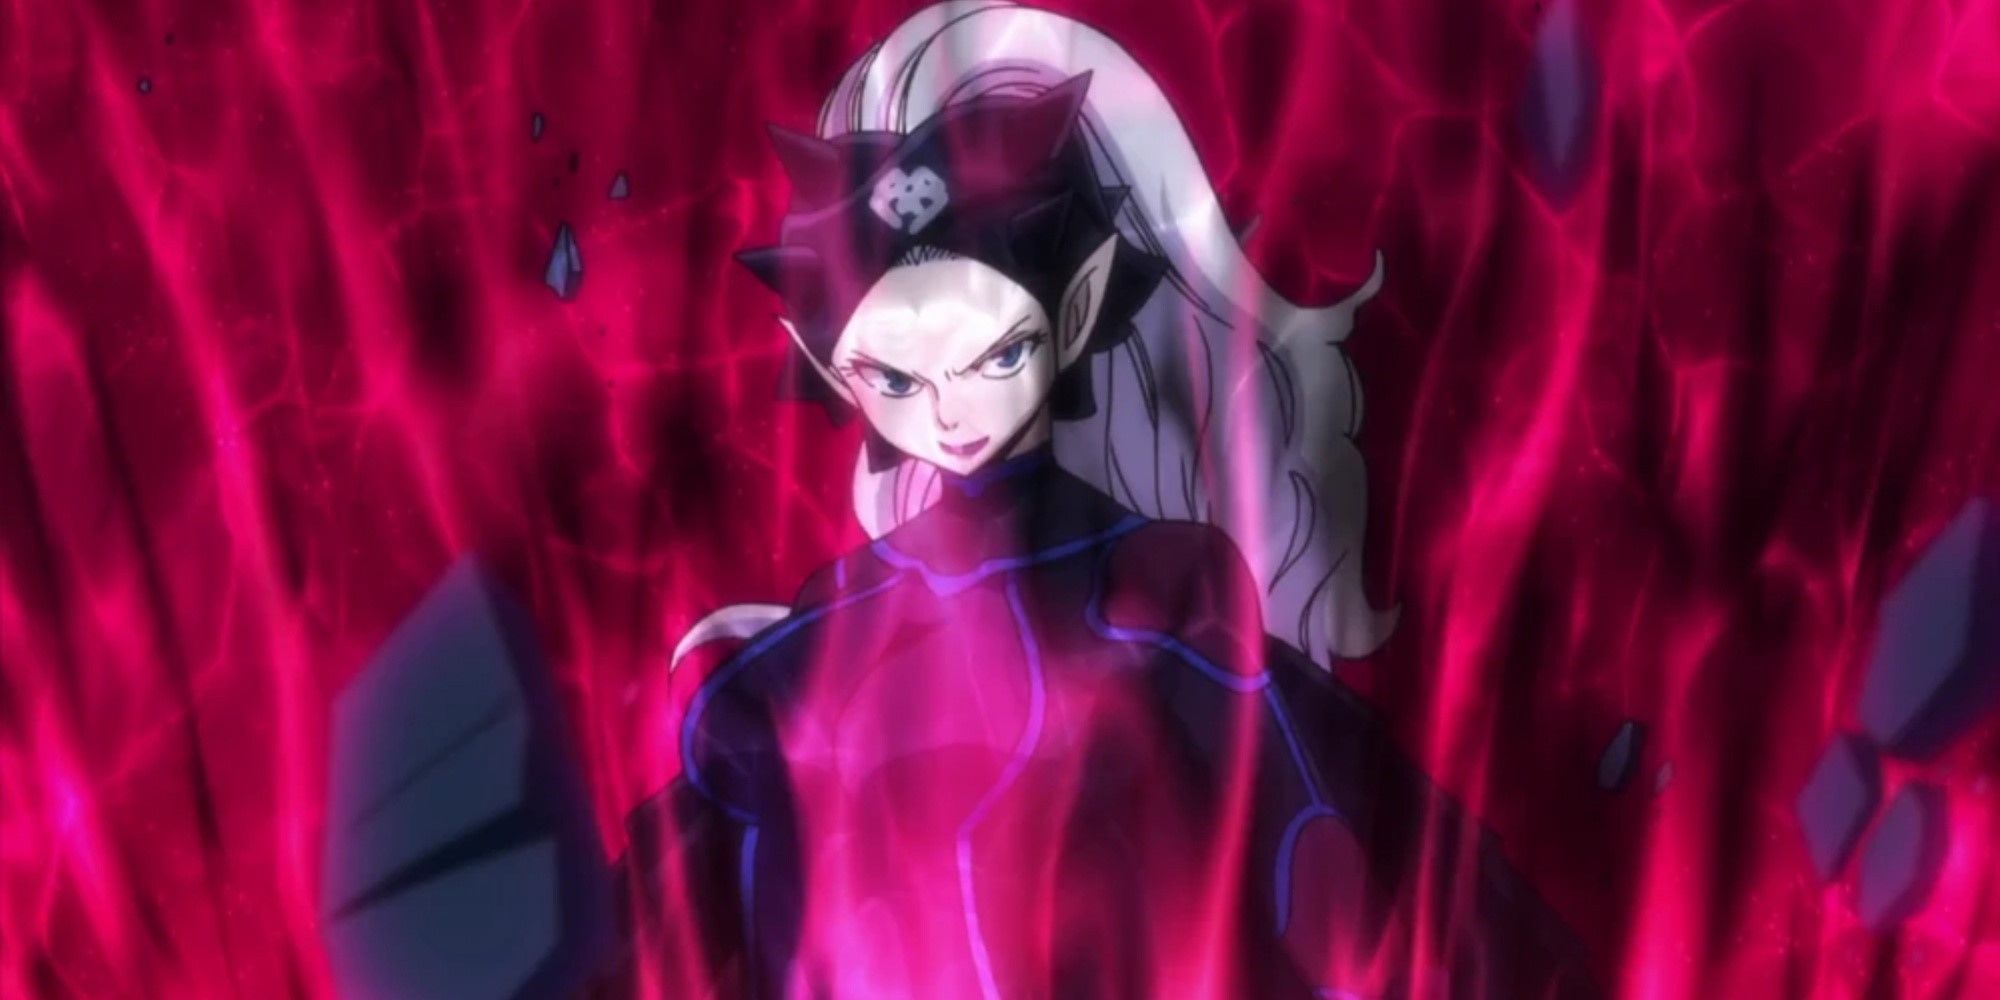 Mirajane From Fairy Tail Surrounded by Dark Energy